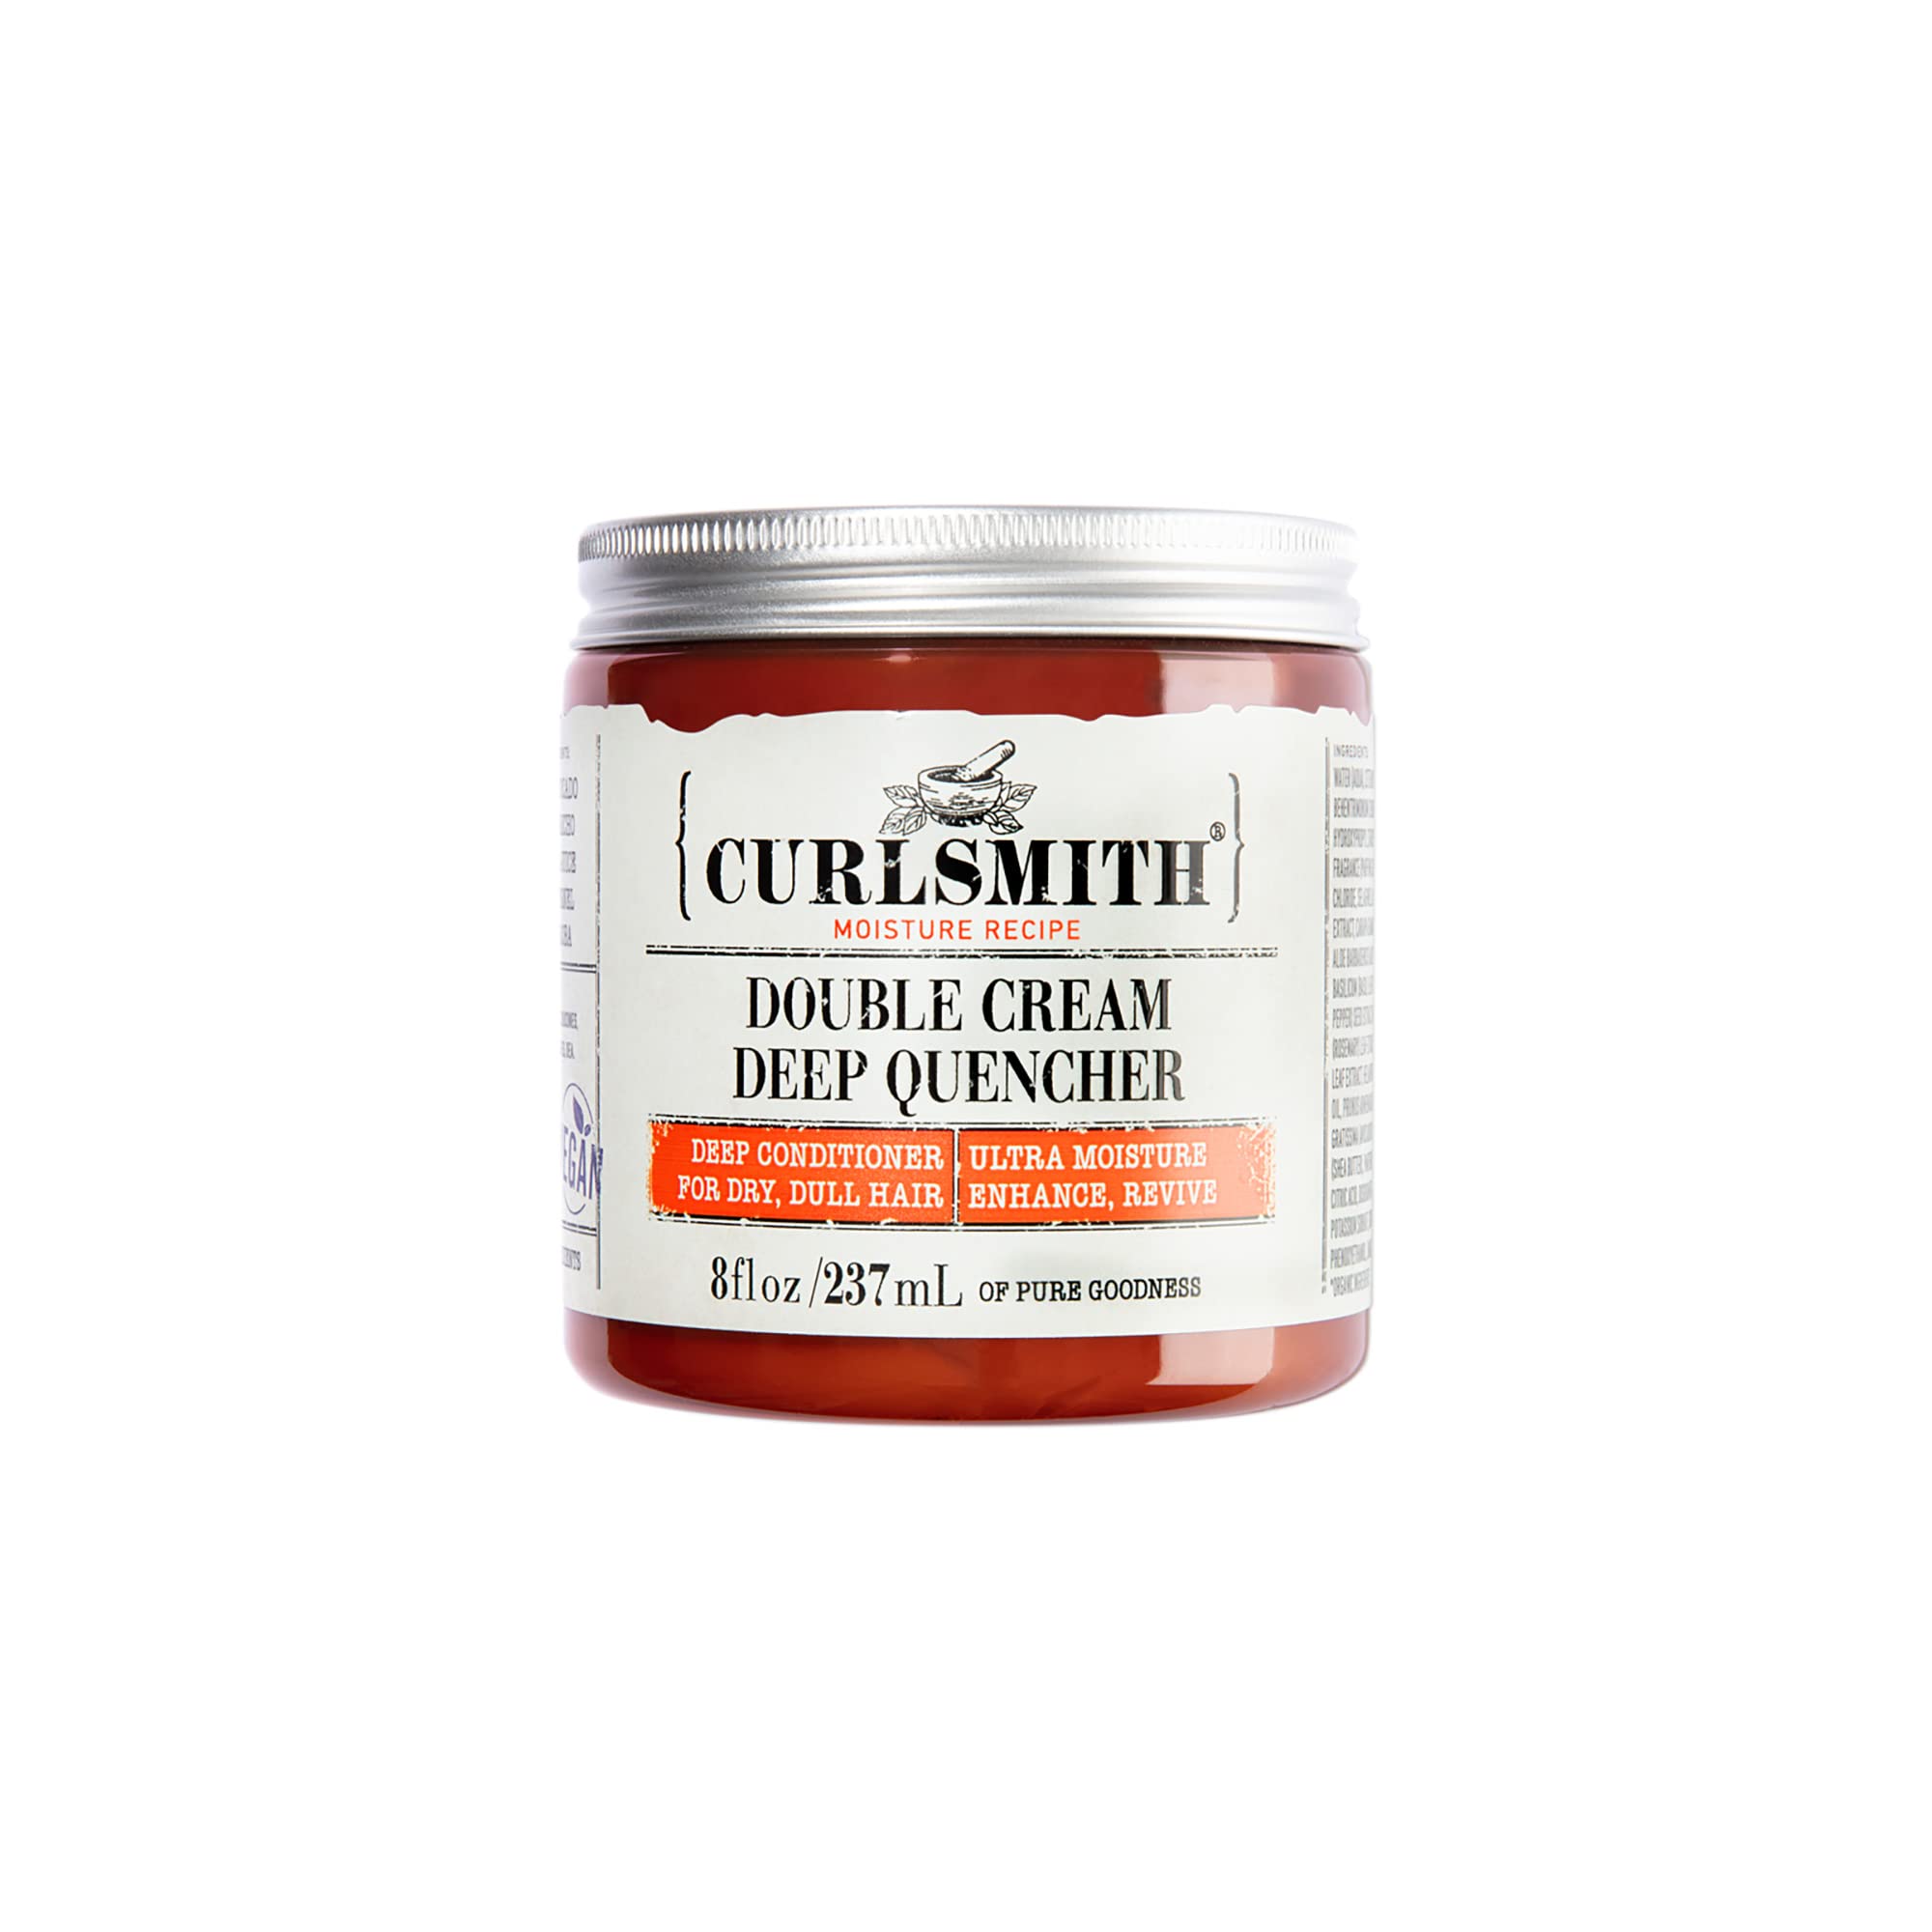 CURLSMITH - Double Cream Deep Quencher - Vegan Moisturising Deep Conditioner for Ultra Dry, Wavy, Curly or Coily Hair (8oz)